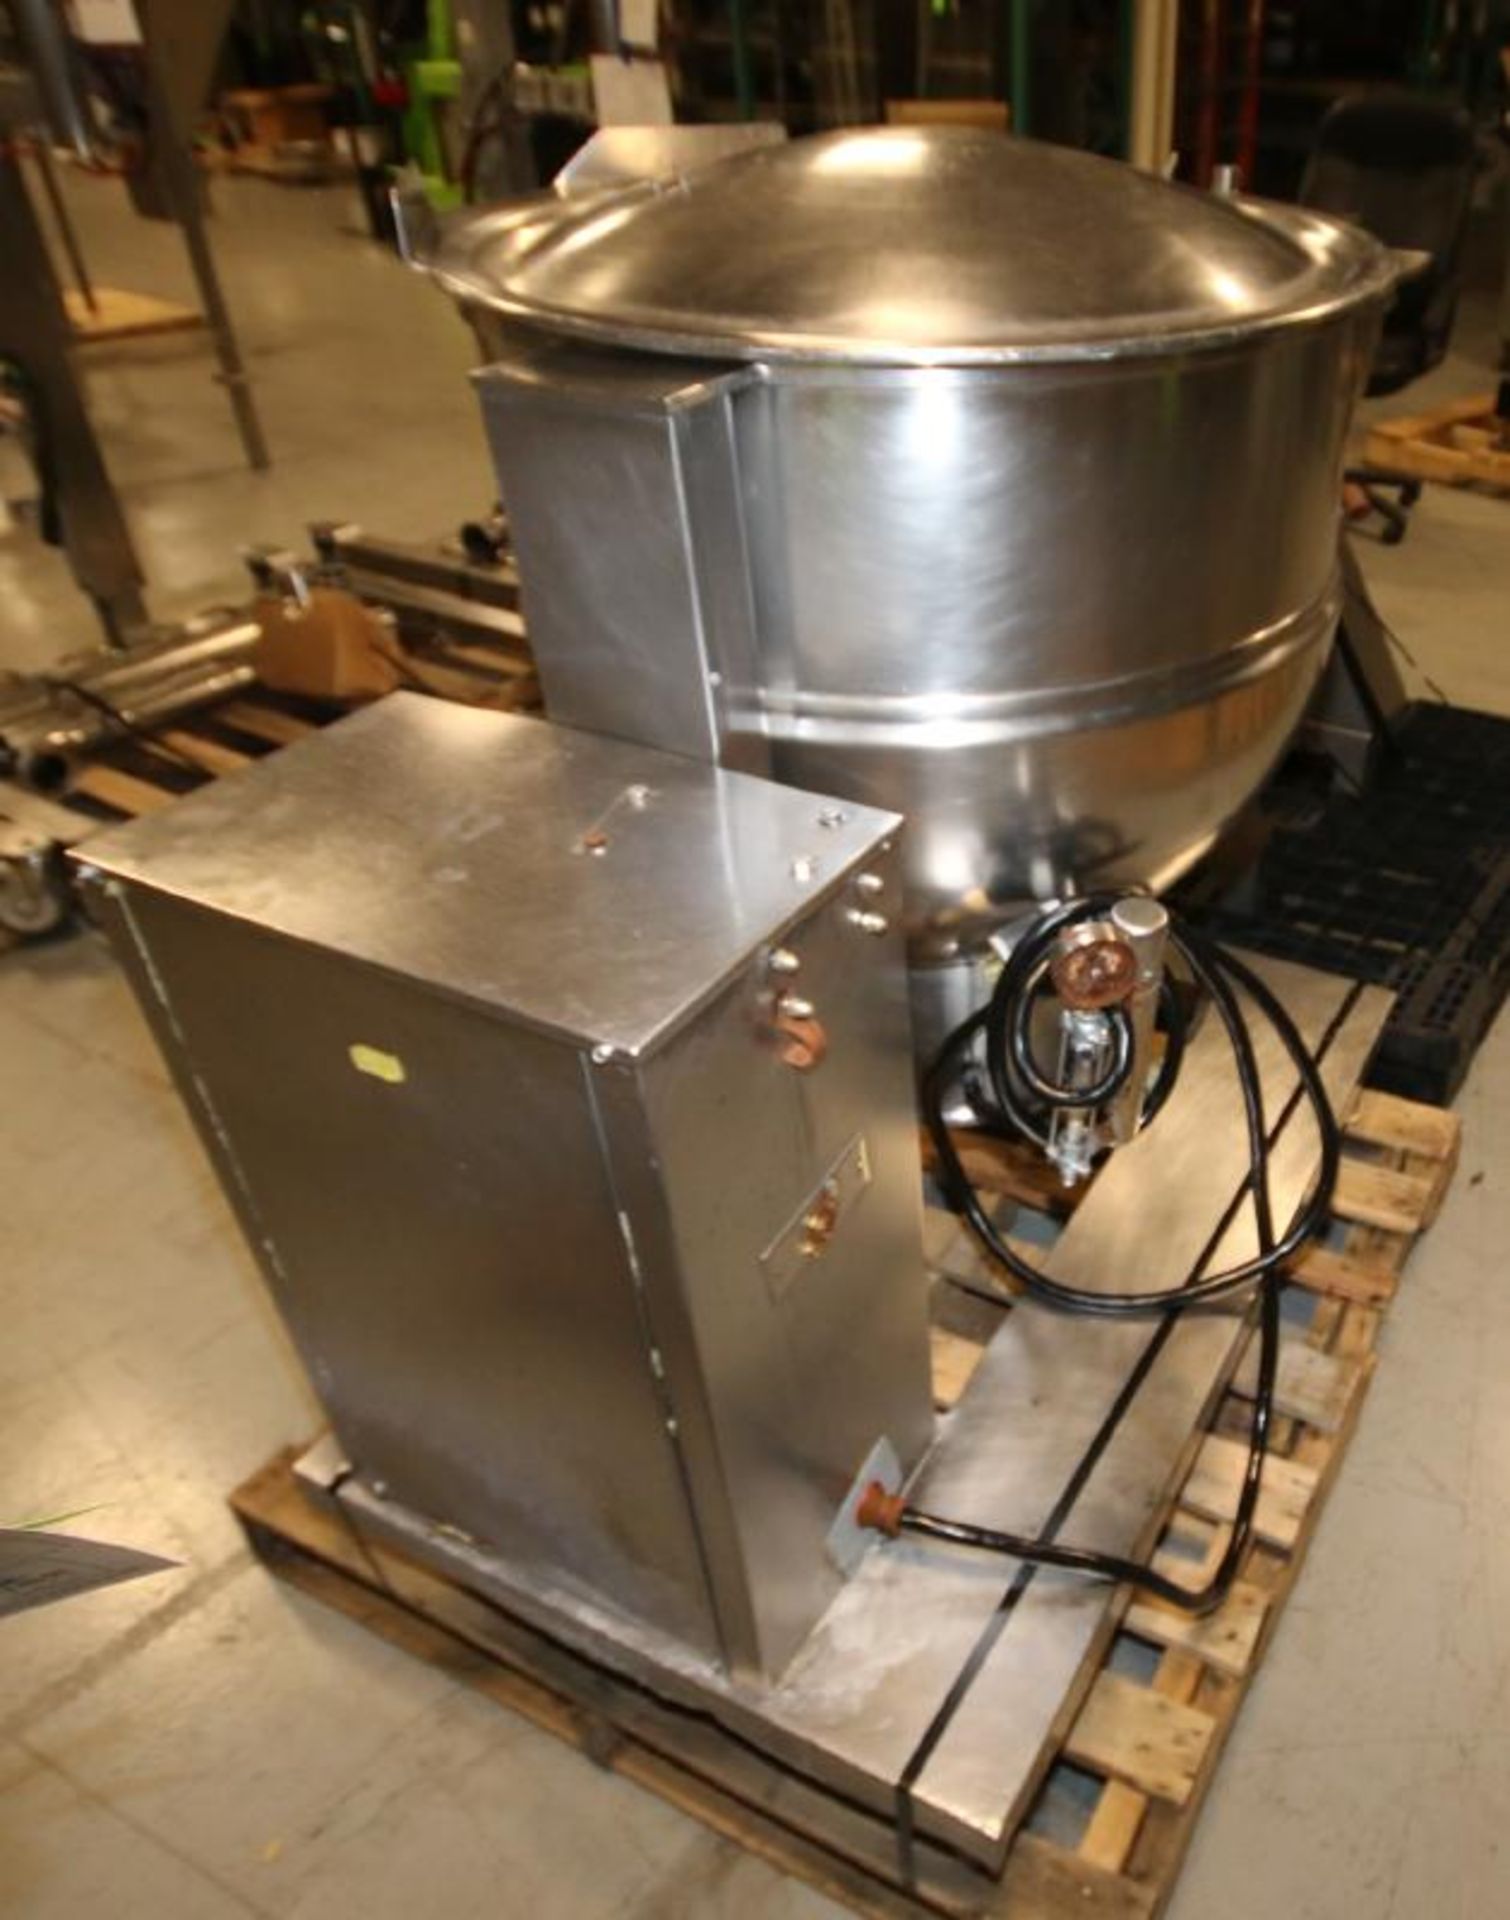 Groen 60 Gal. Tilt Kettle, Model DEE/4T-60, S/N 37173, Jacketed Rated @ 50 PSI @ 300 Degree F (Asset - Image 6 of 7